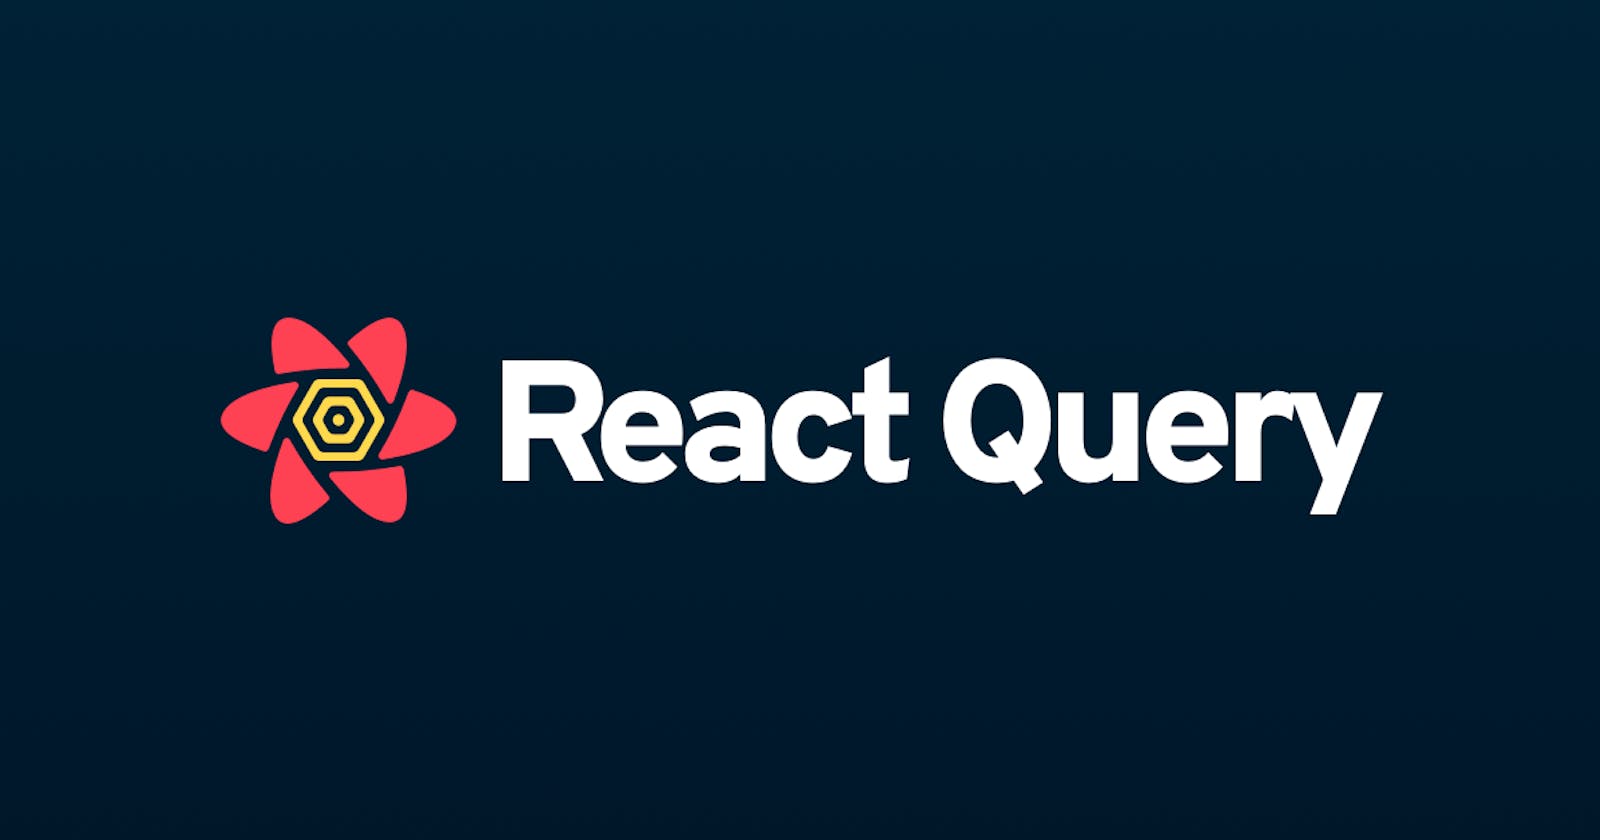 React Query (Brief Introduction with Intermediate/Advanced Flash Notes)